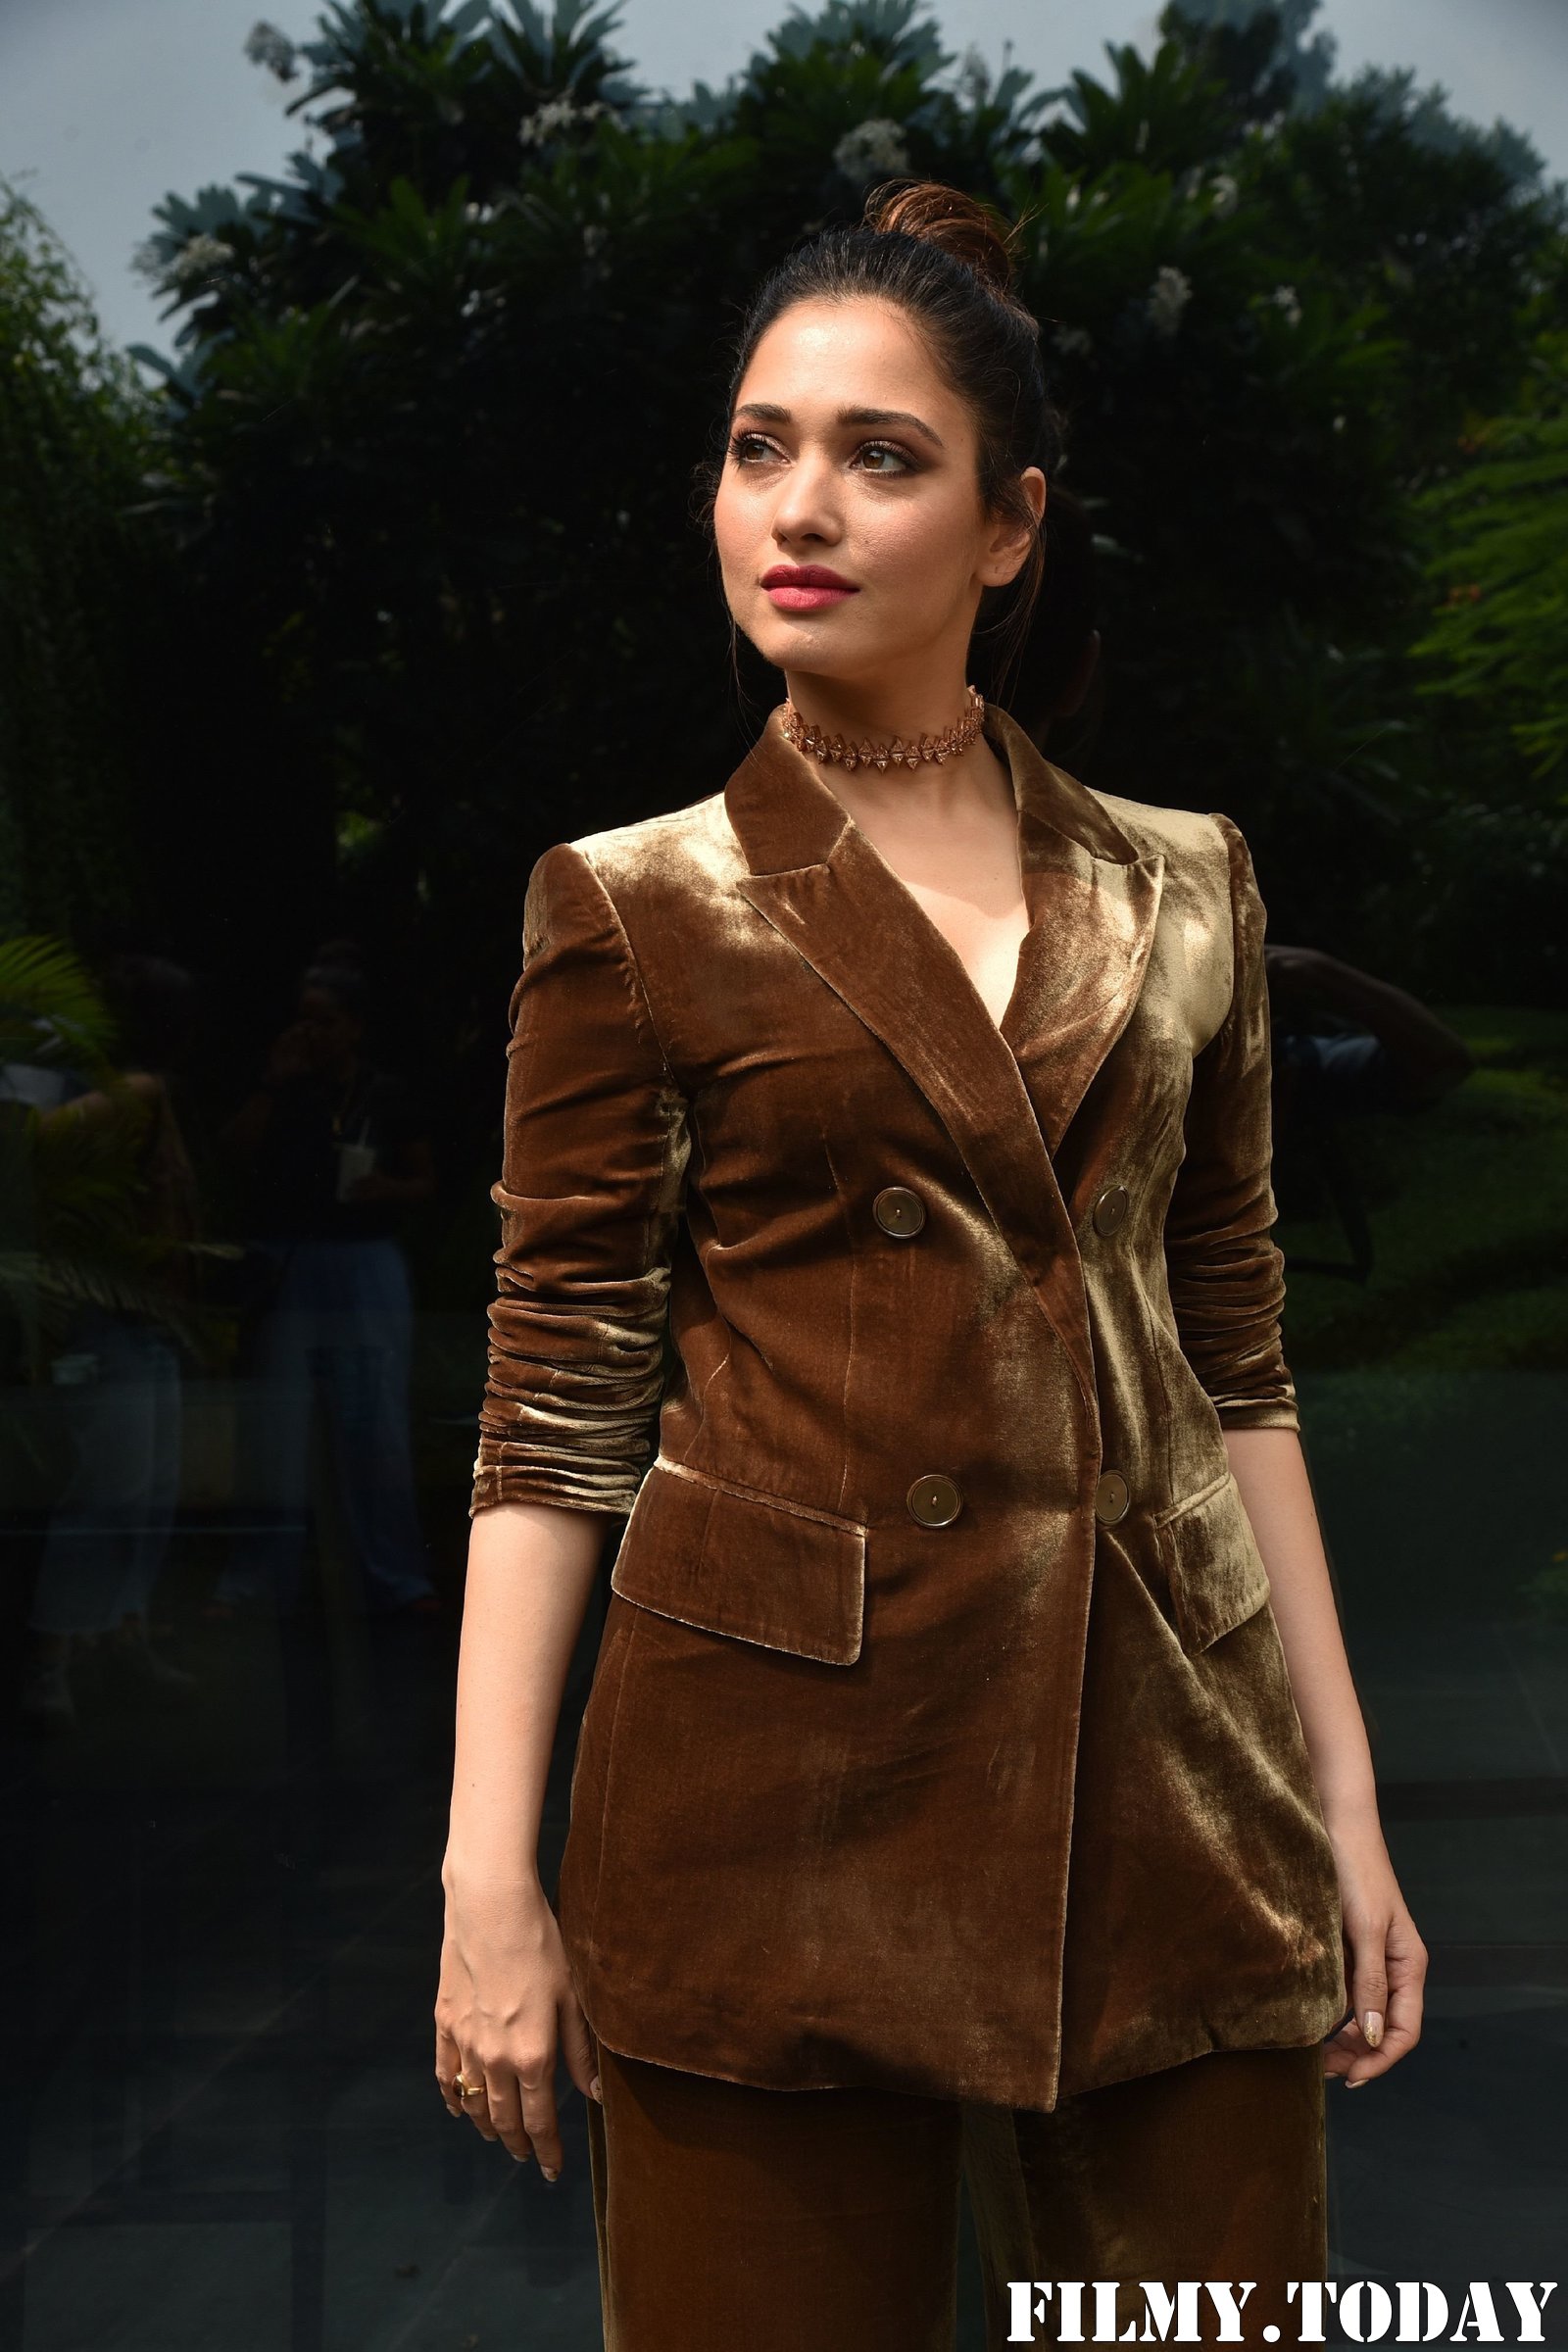 Photos: Tamanna Bhatia At Action Movie Promotions | Picture 1697948